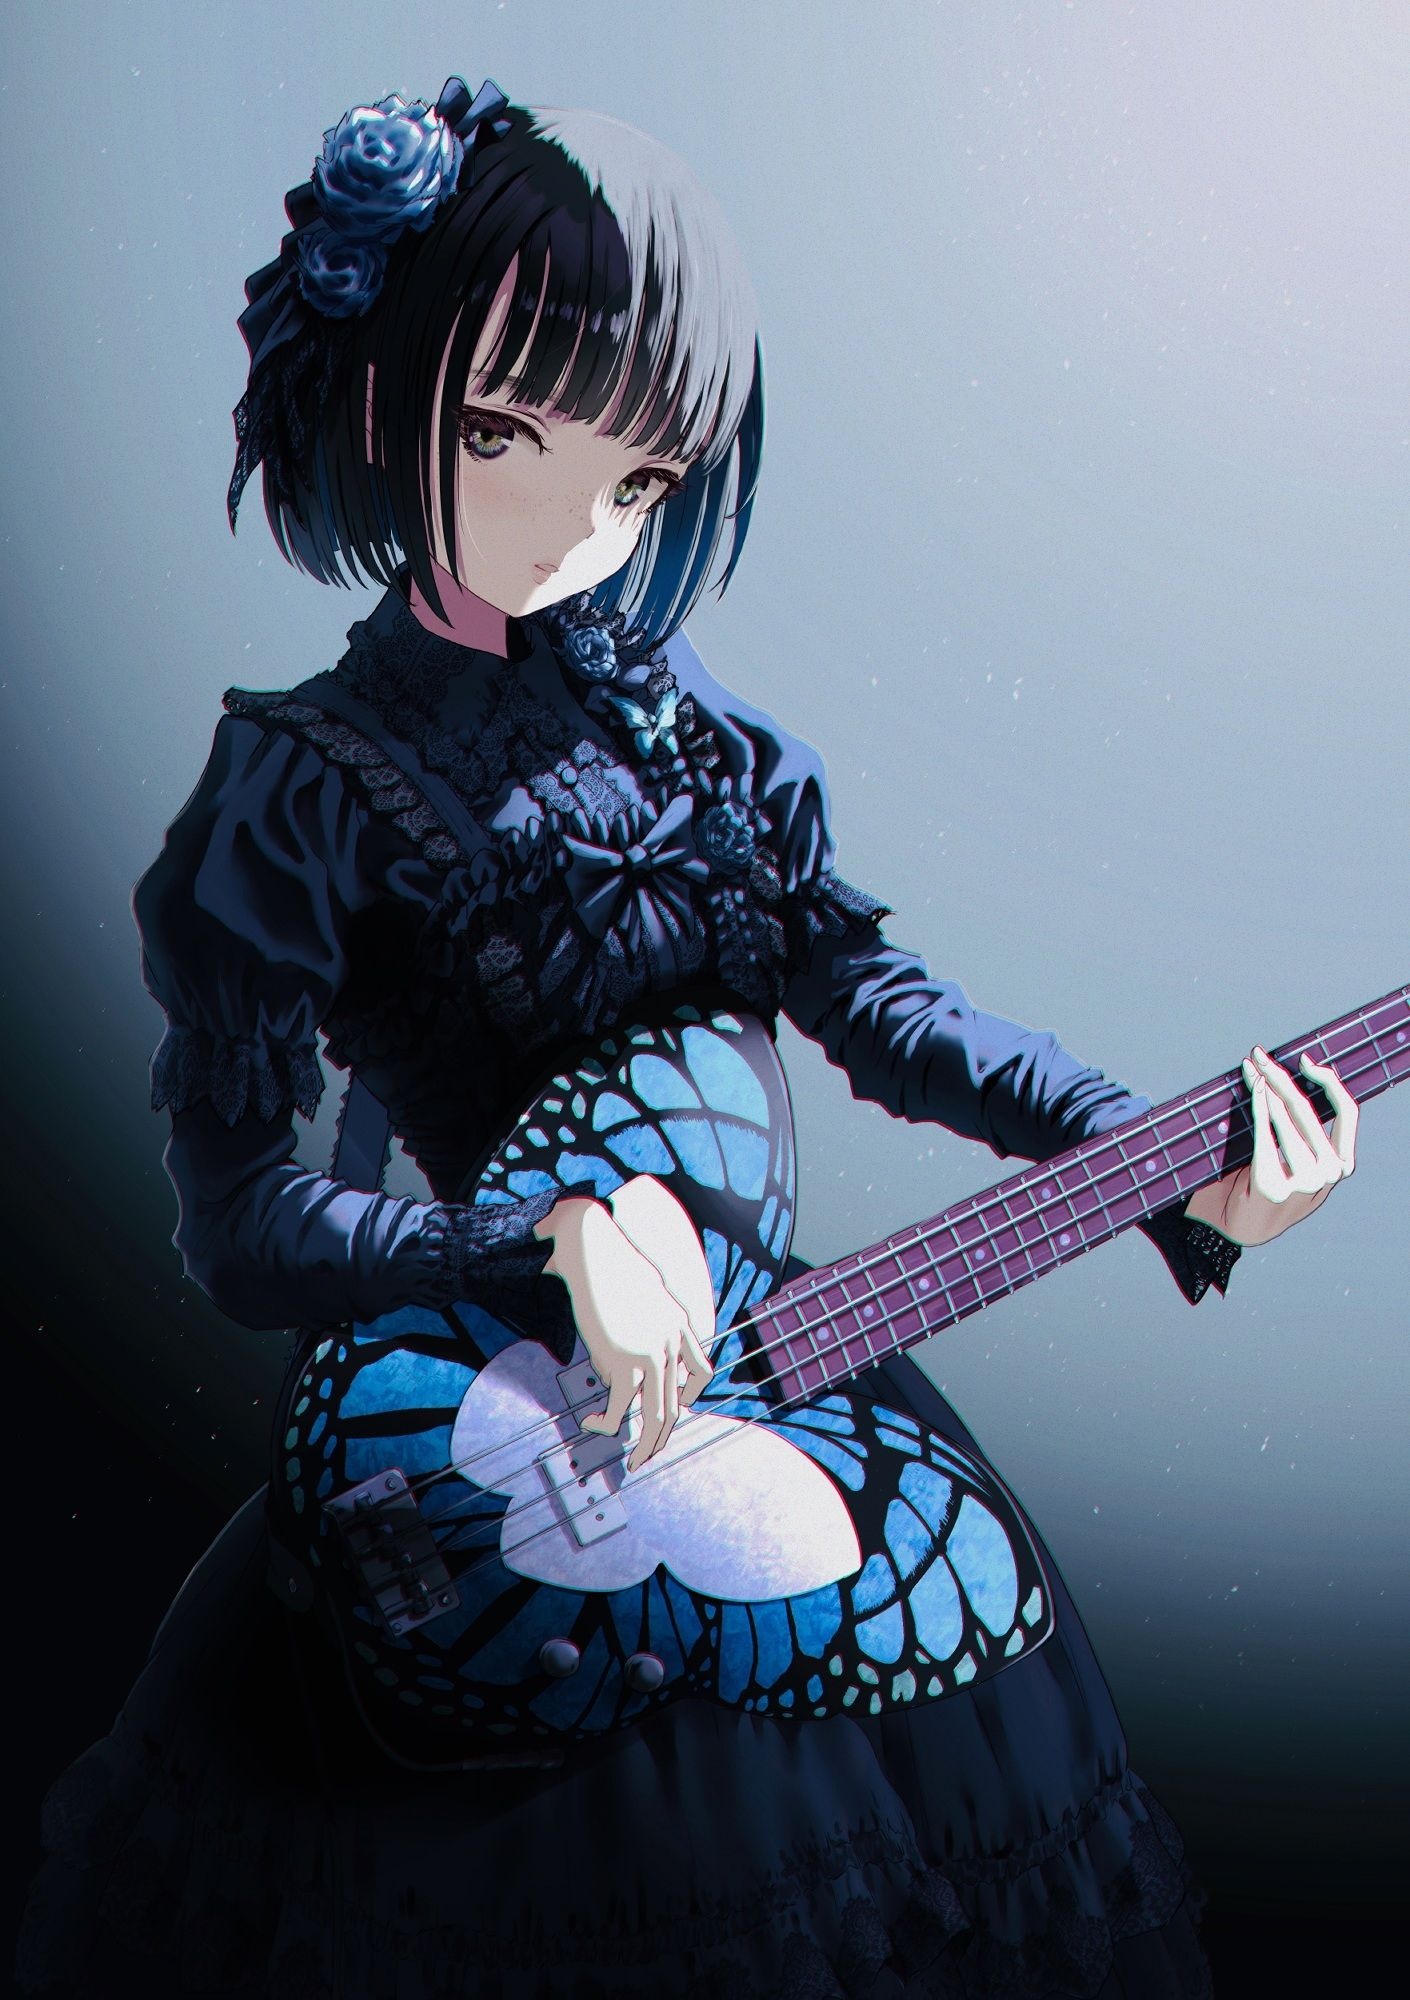 Gothic Anime: Girl with bass guitar, Medieval style subculture, Victorian dress, Manga girl. 1410x2000 HD Wallpaper.